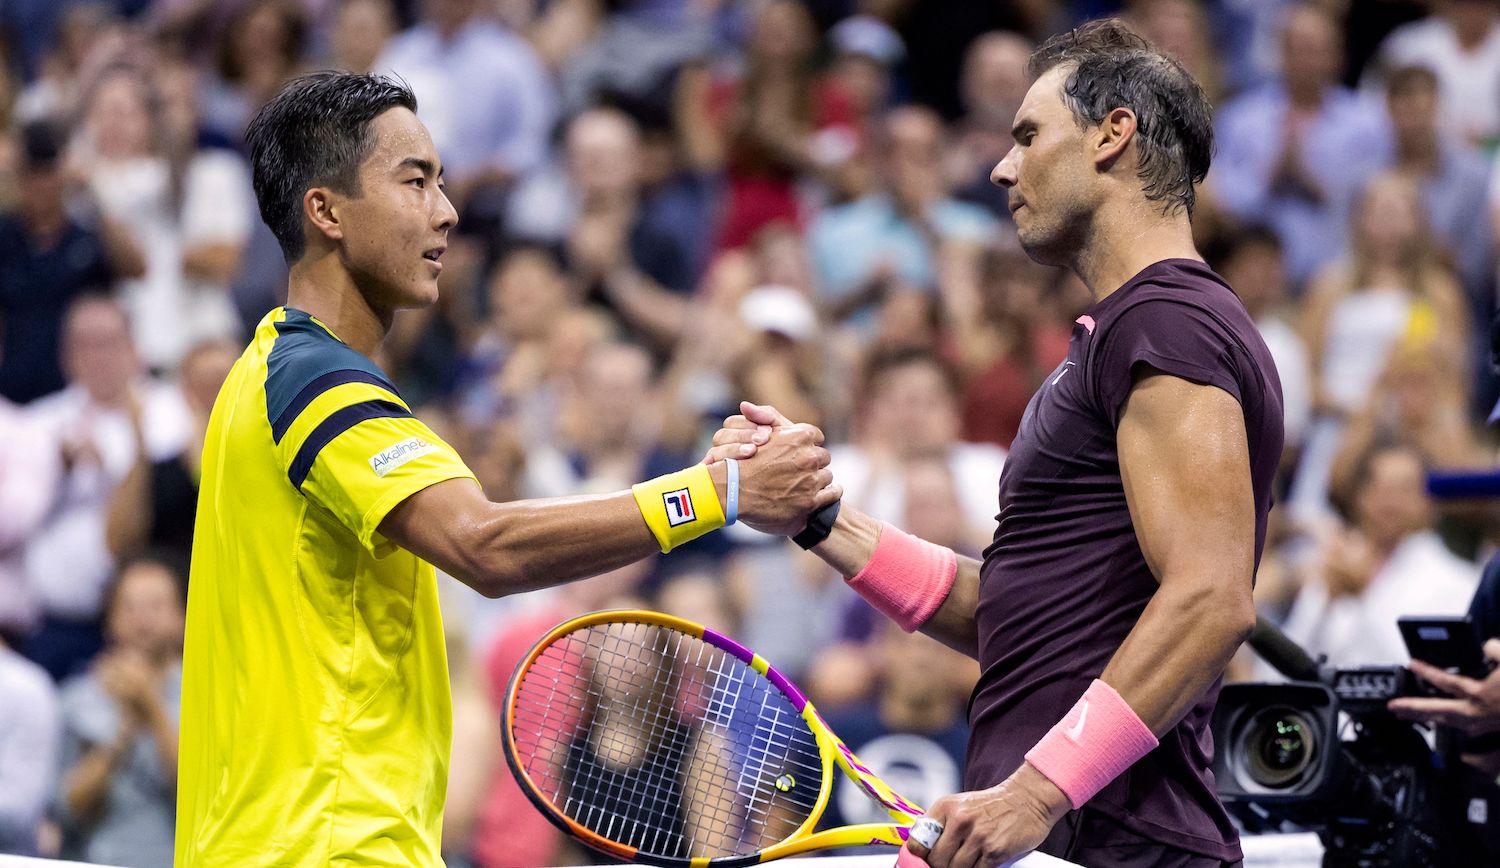 Spain's Rafael Nadal (R) greets Australia's Rinky Hijikata (L) during their 2022 US Open Tennis tournament men's singles first round match at the USTA Billie Jean King National Tennis Center in New York, on August 30, 2022. (Photo by COREY SIPKIN / AFP) (Photo by COREY SIPKIN/AFP via Getty Images)